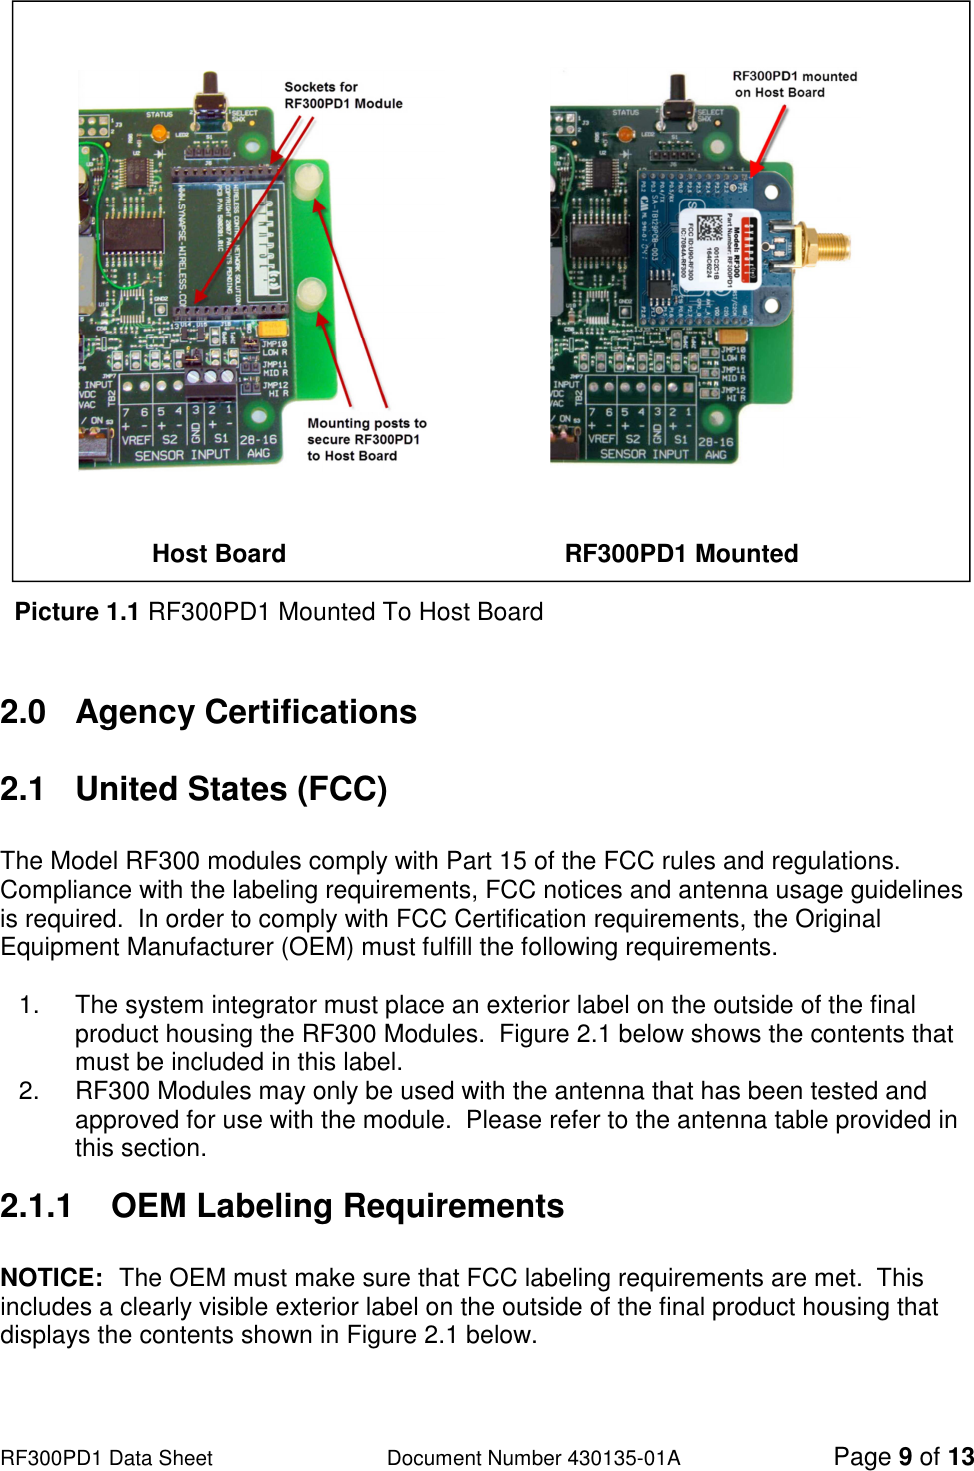                                                                                                                                                                          RF300PD1 Data Sheet                   Document Number 430135-01A Page 9 of 13                                                                  Host Board                                        RF300PD1 Mounted    Picture 1.1 RF300PD1 Mounted To Host Board   2.0  Agency Certifications  2.1  United States (FCC)  The Model RF300 modules comply with Part 15 of the FCC rules and regulations.  Compliance with the labeling requirements, FCC notices and antenna usage guidelines is required.  In order to comply with FCC Certification requirements, the Original Equipment Manufacturer (OEM) must fulfill the following requirements.  1.  The system integrator must place an exterior label on the outside of the final product housing the RF300 Modules.  Figure 2.1 below shows the contents that must be included in this label. 2.  RF300 Modules may only be used with the antenna that has been tested and approved for use with the module.  Please refer to the antenna table provided in this section.  2.1.1    OEM Labeling Requirements  NOTICE:  The OEM must make sure that FCC labeling requirements are met.  This includes a clearly visible exterior label on the outside of the final product housing that displays the contents shown in Figure 2.1 below.  